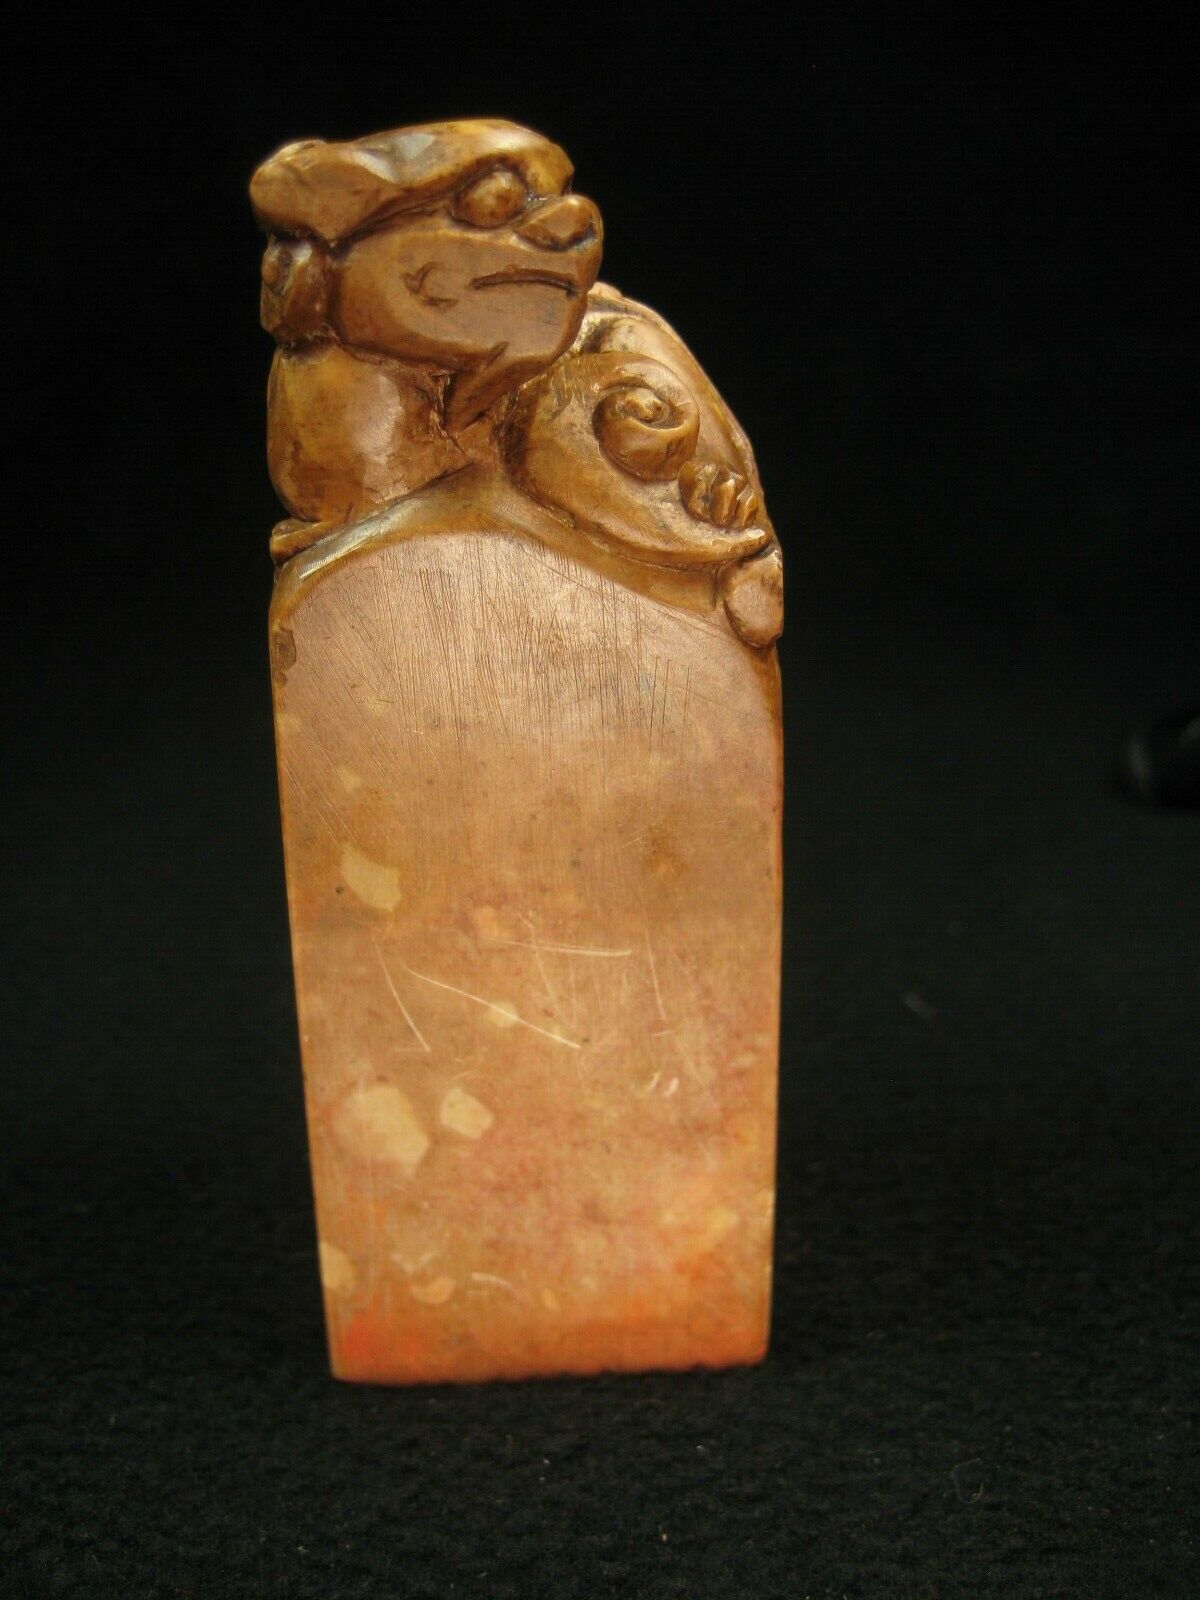 Antique Japanese Handcarved Inkan Marble Name Stamp With Shishi Foo Dog & Name